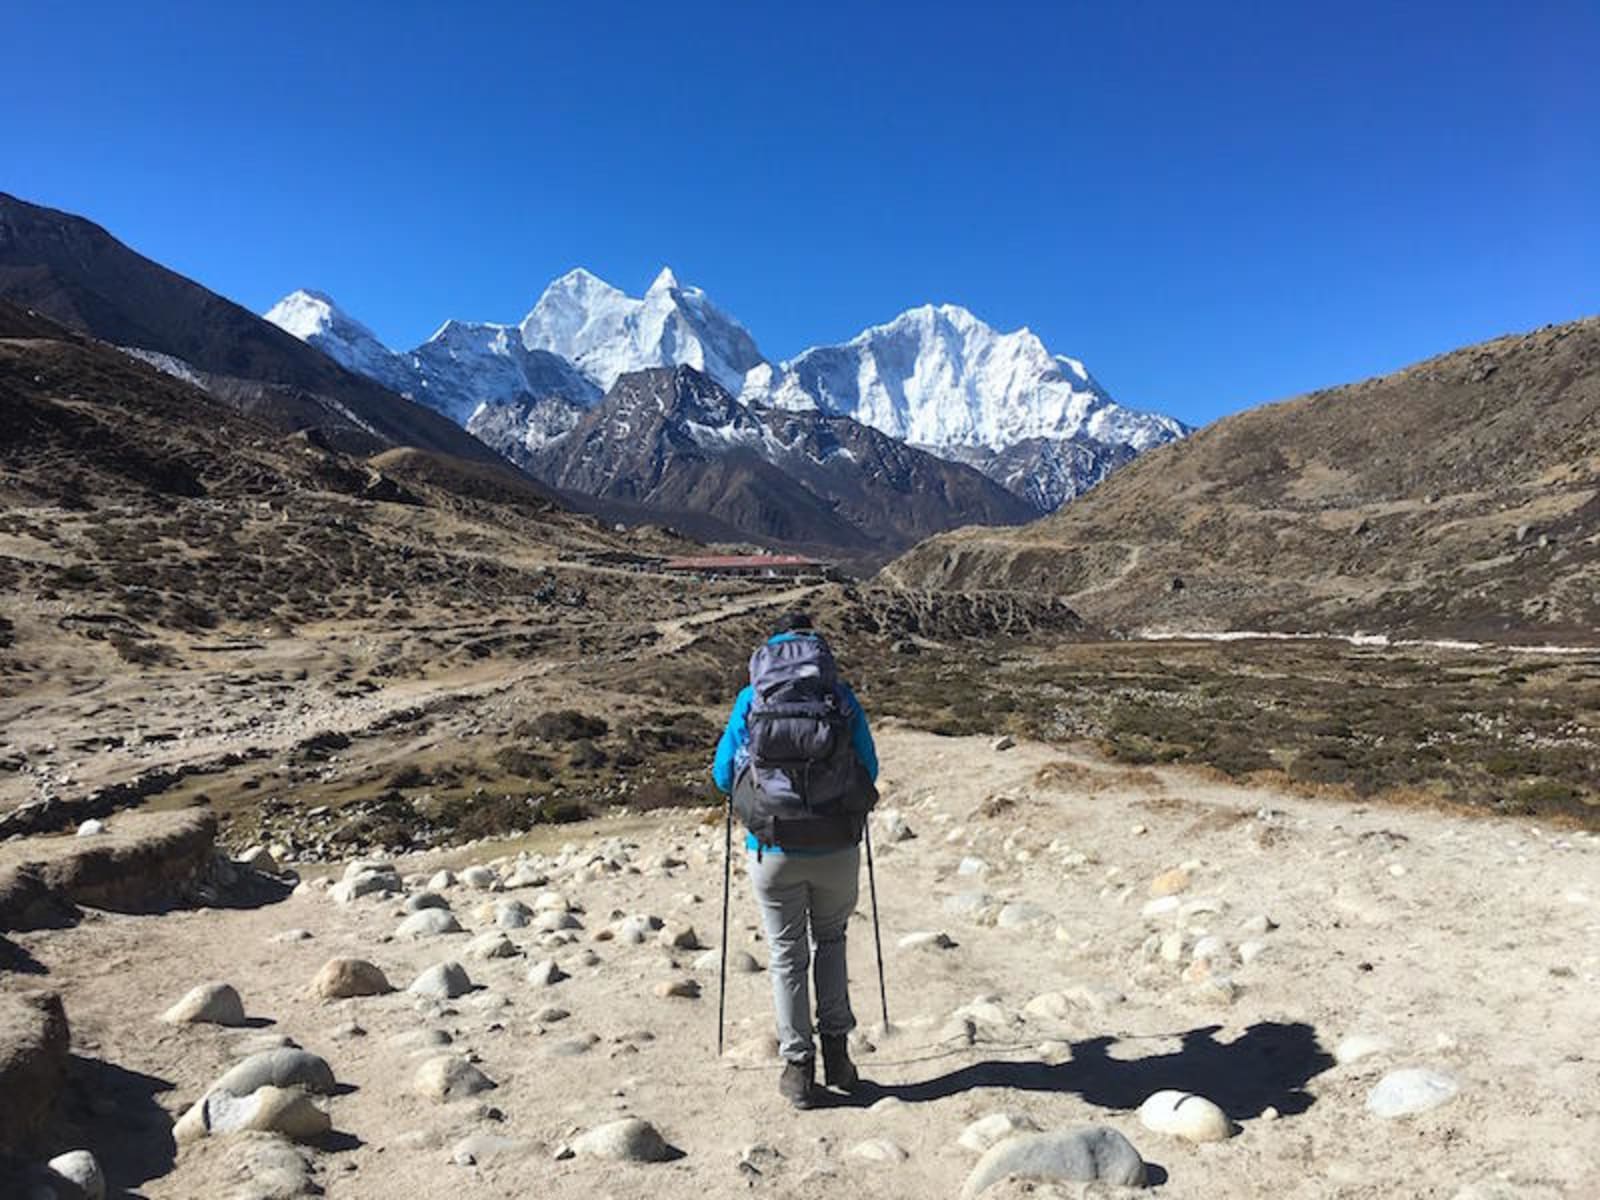 Hiker staring up at Mount Everest on a clear day